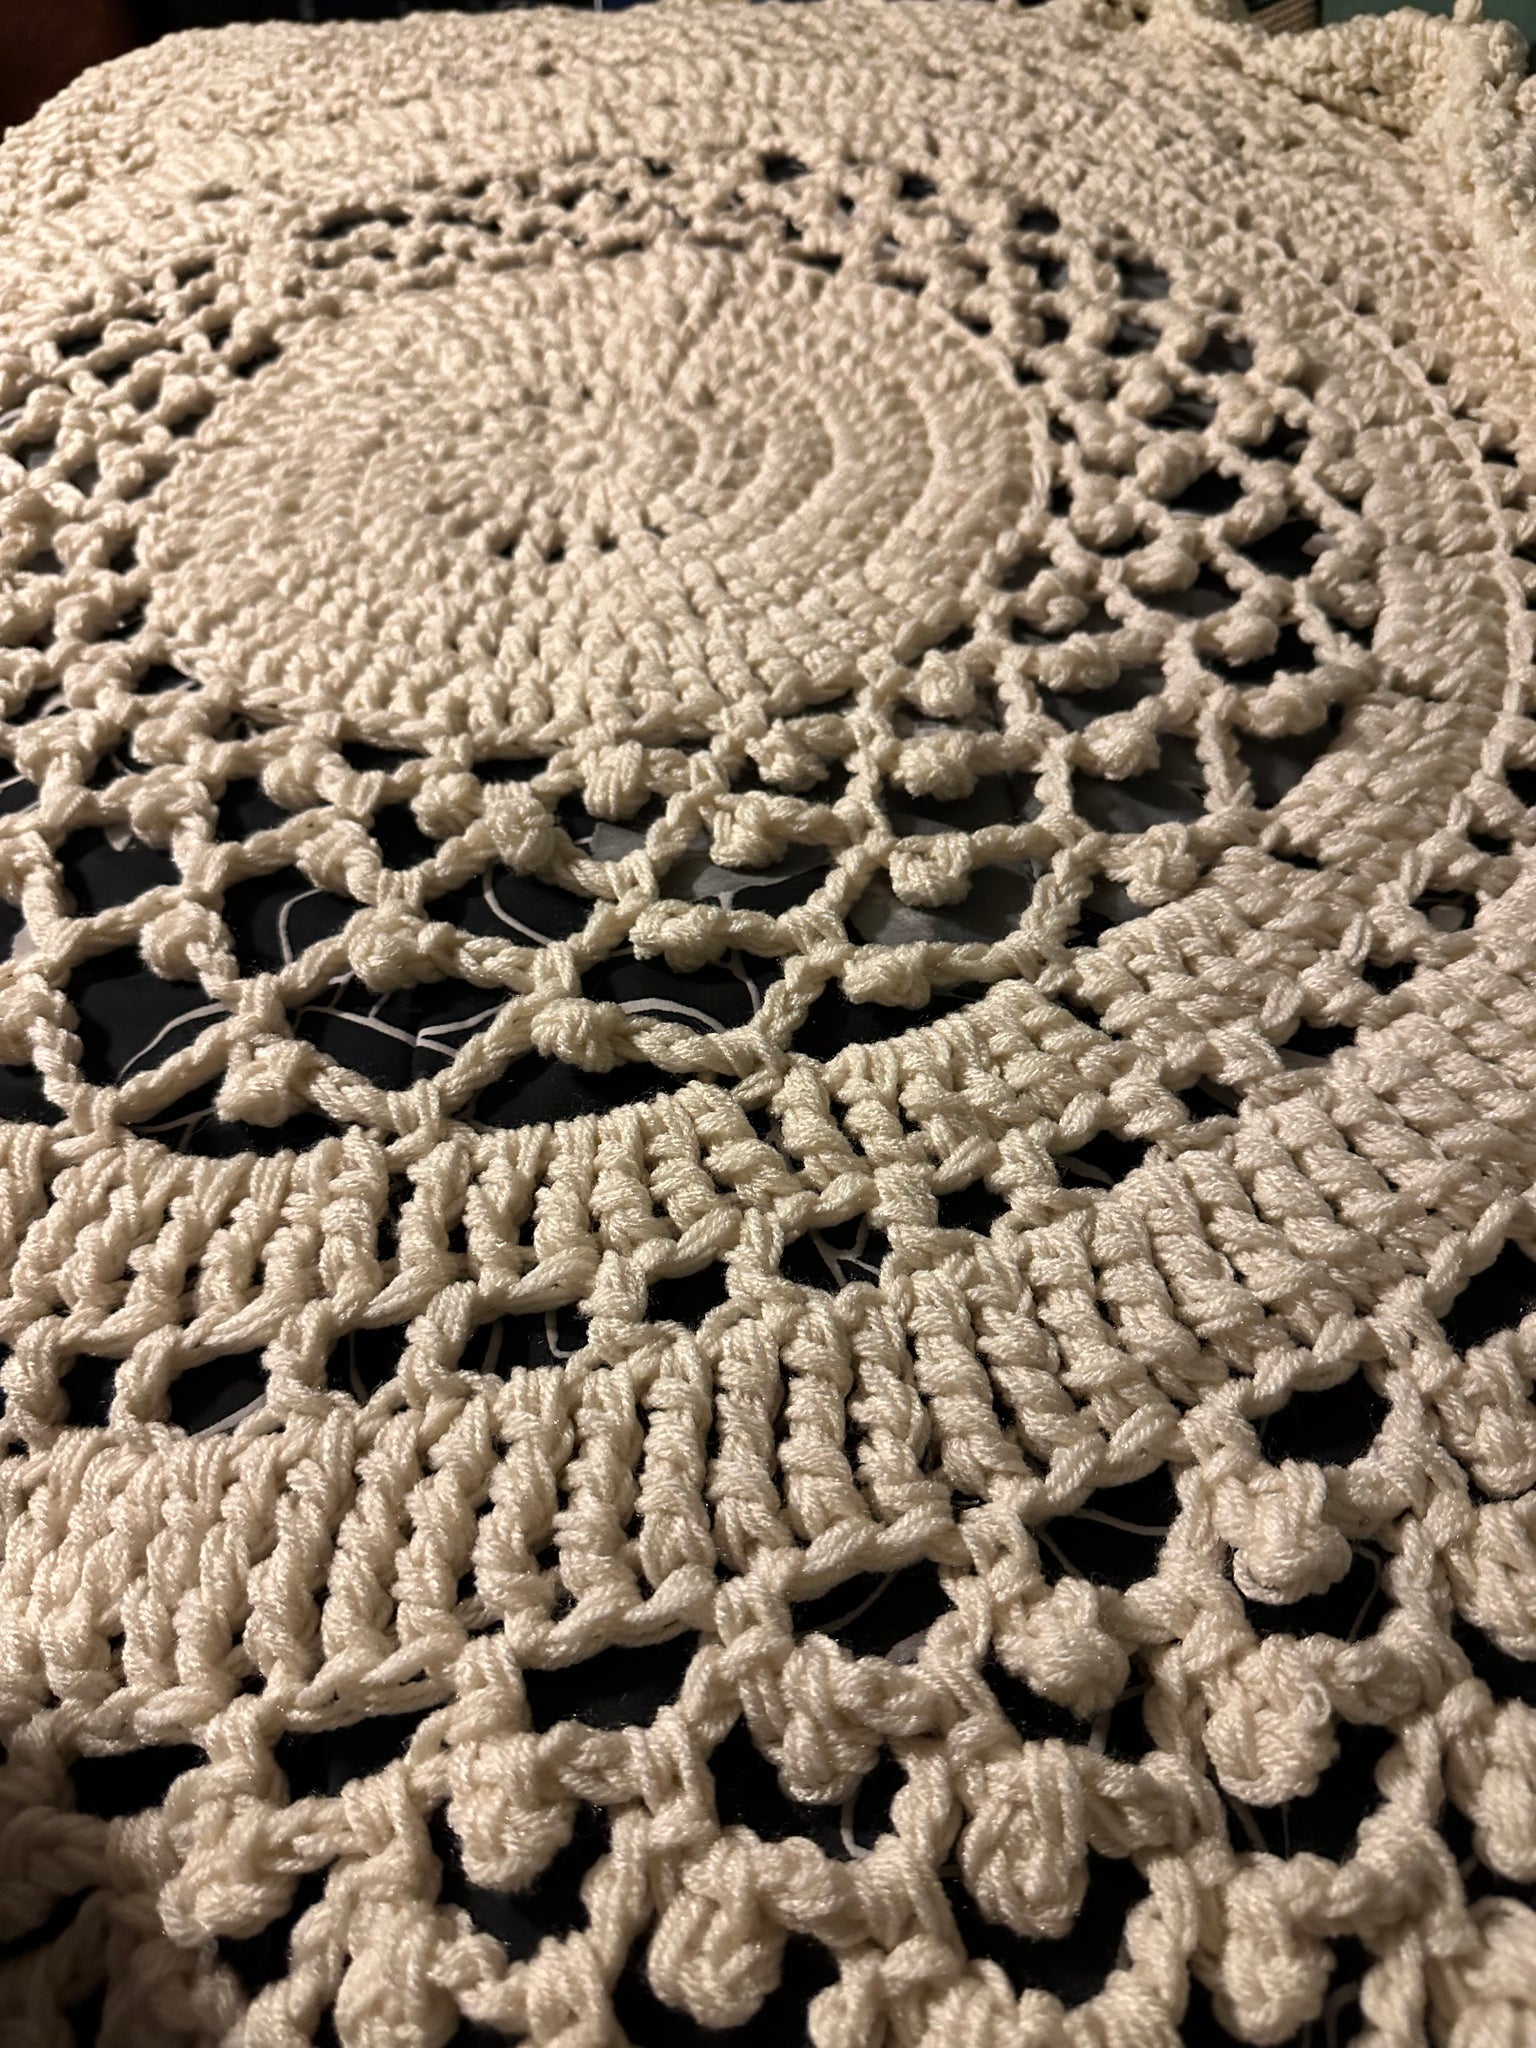 Crocheted Round Popcorn Afghan